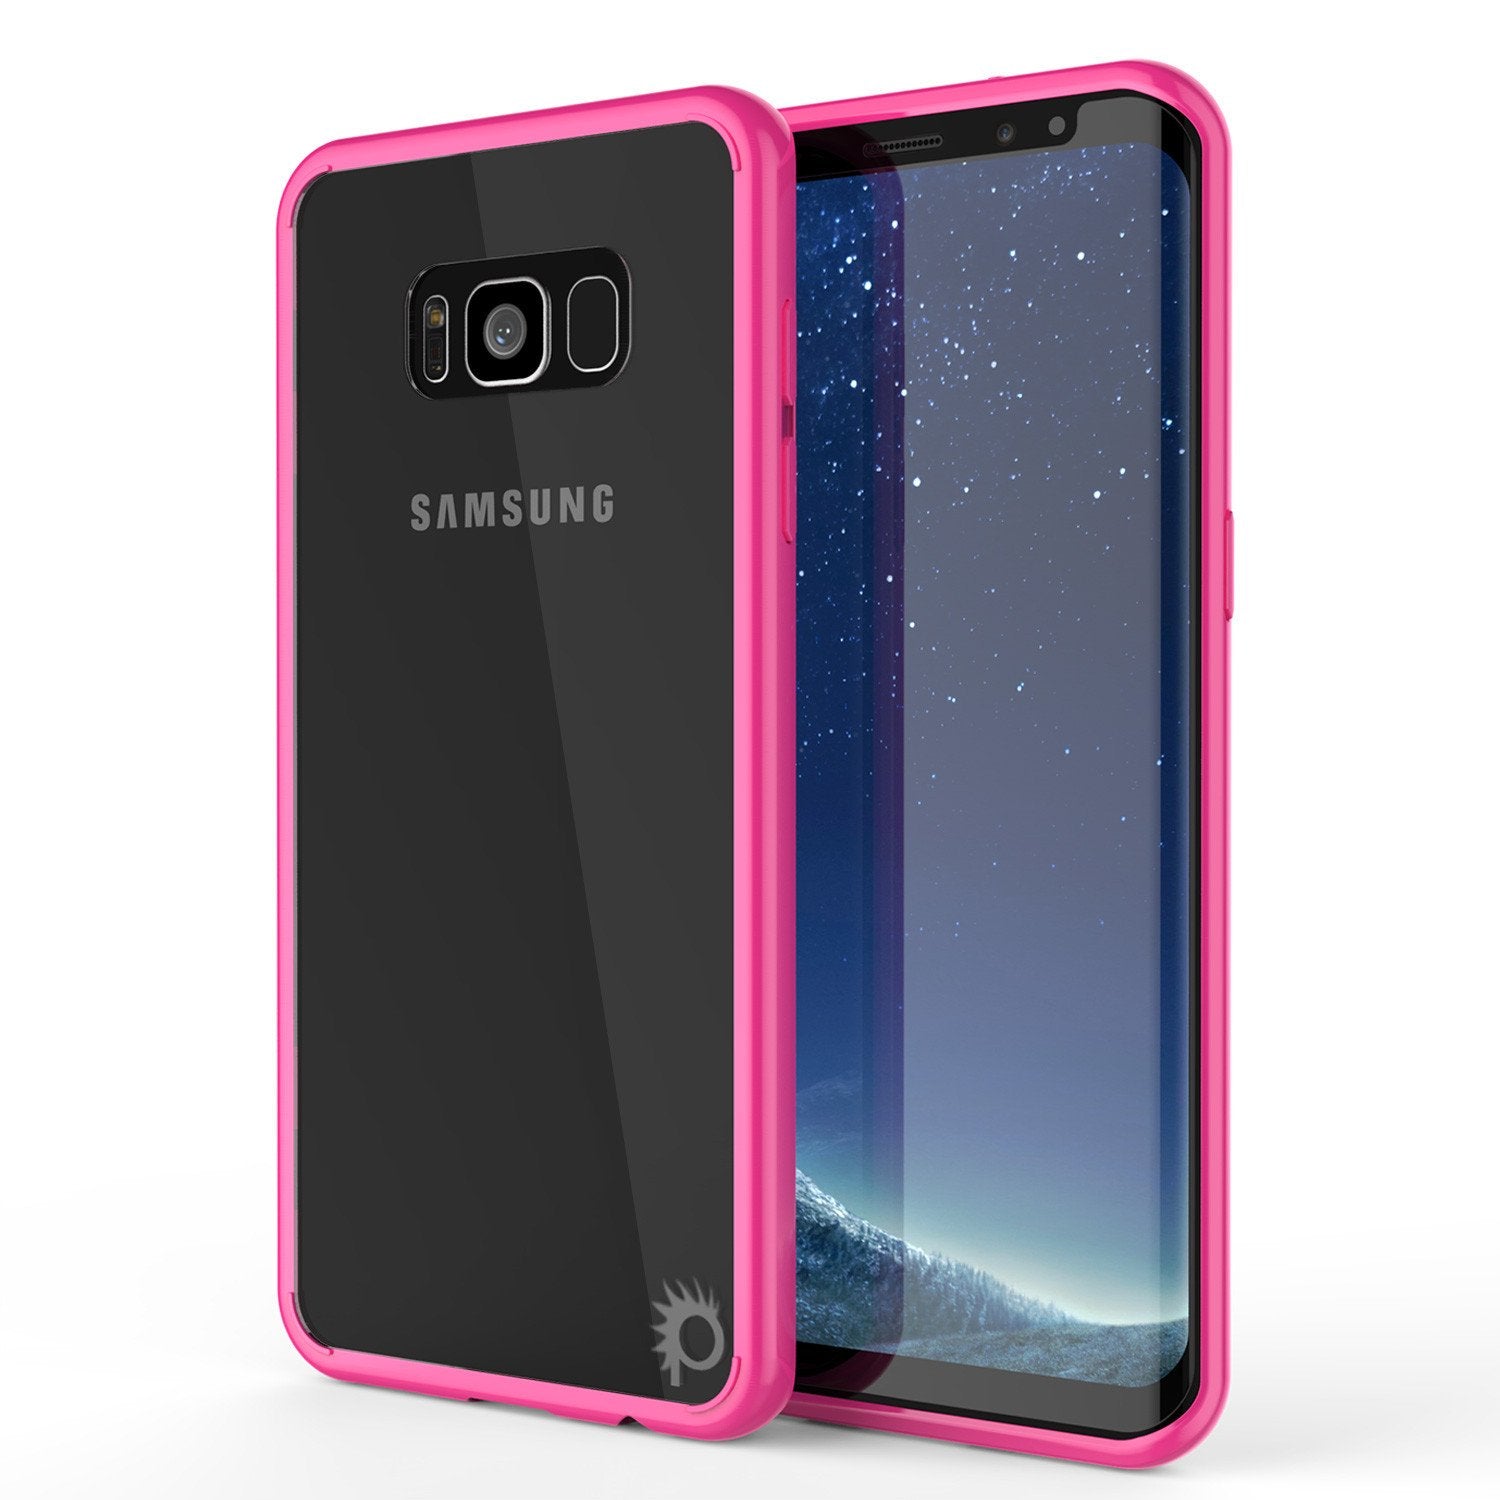 Galaxy S8 Plus Punkcase LUCID 2.0 Series Clear Back Case [Pink]